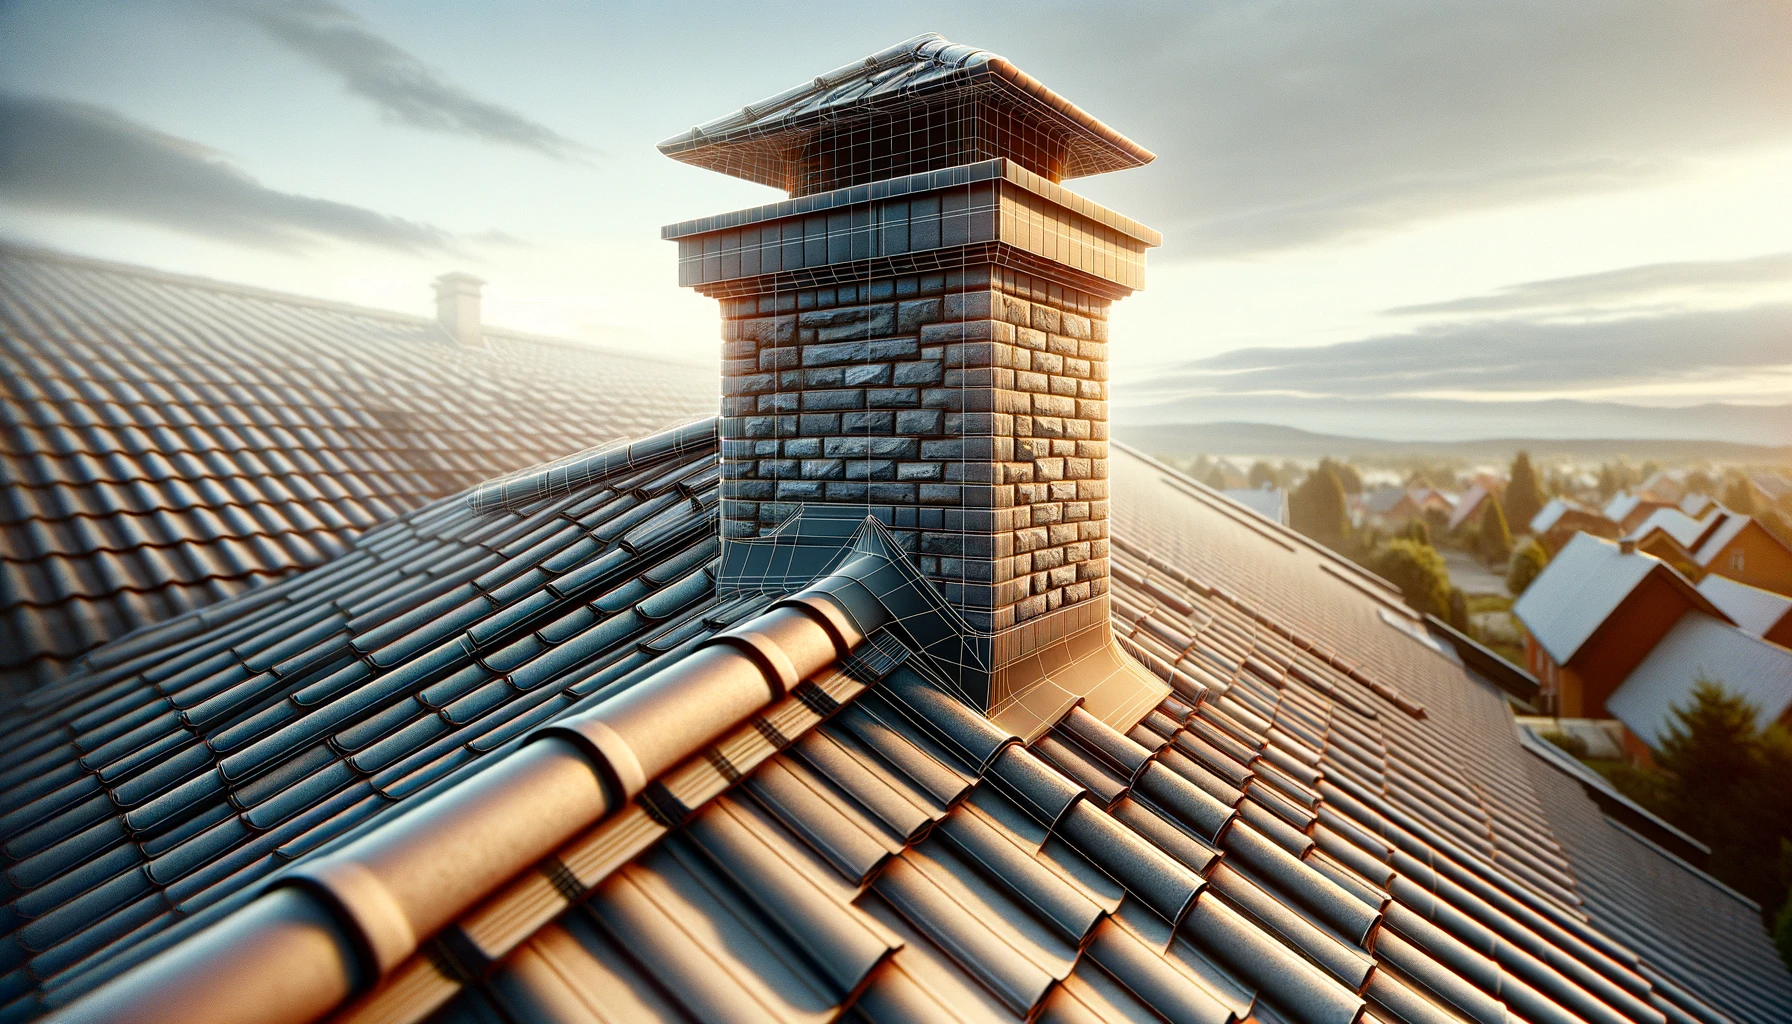 Chimney on a home rooftop